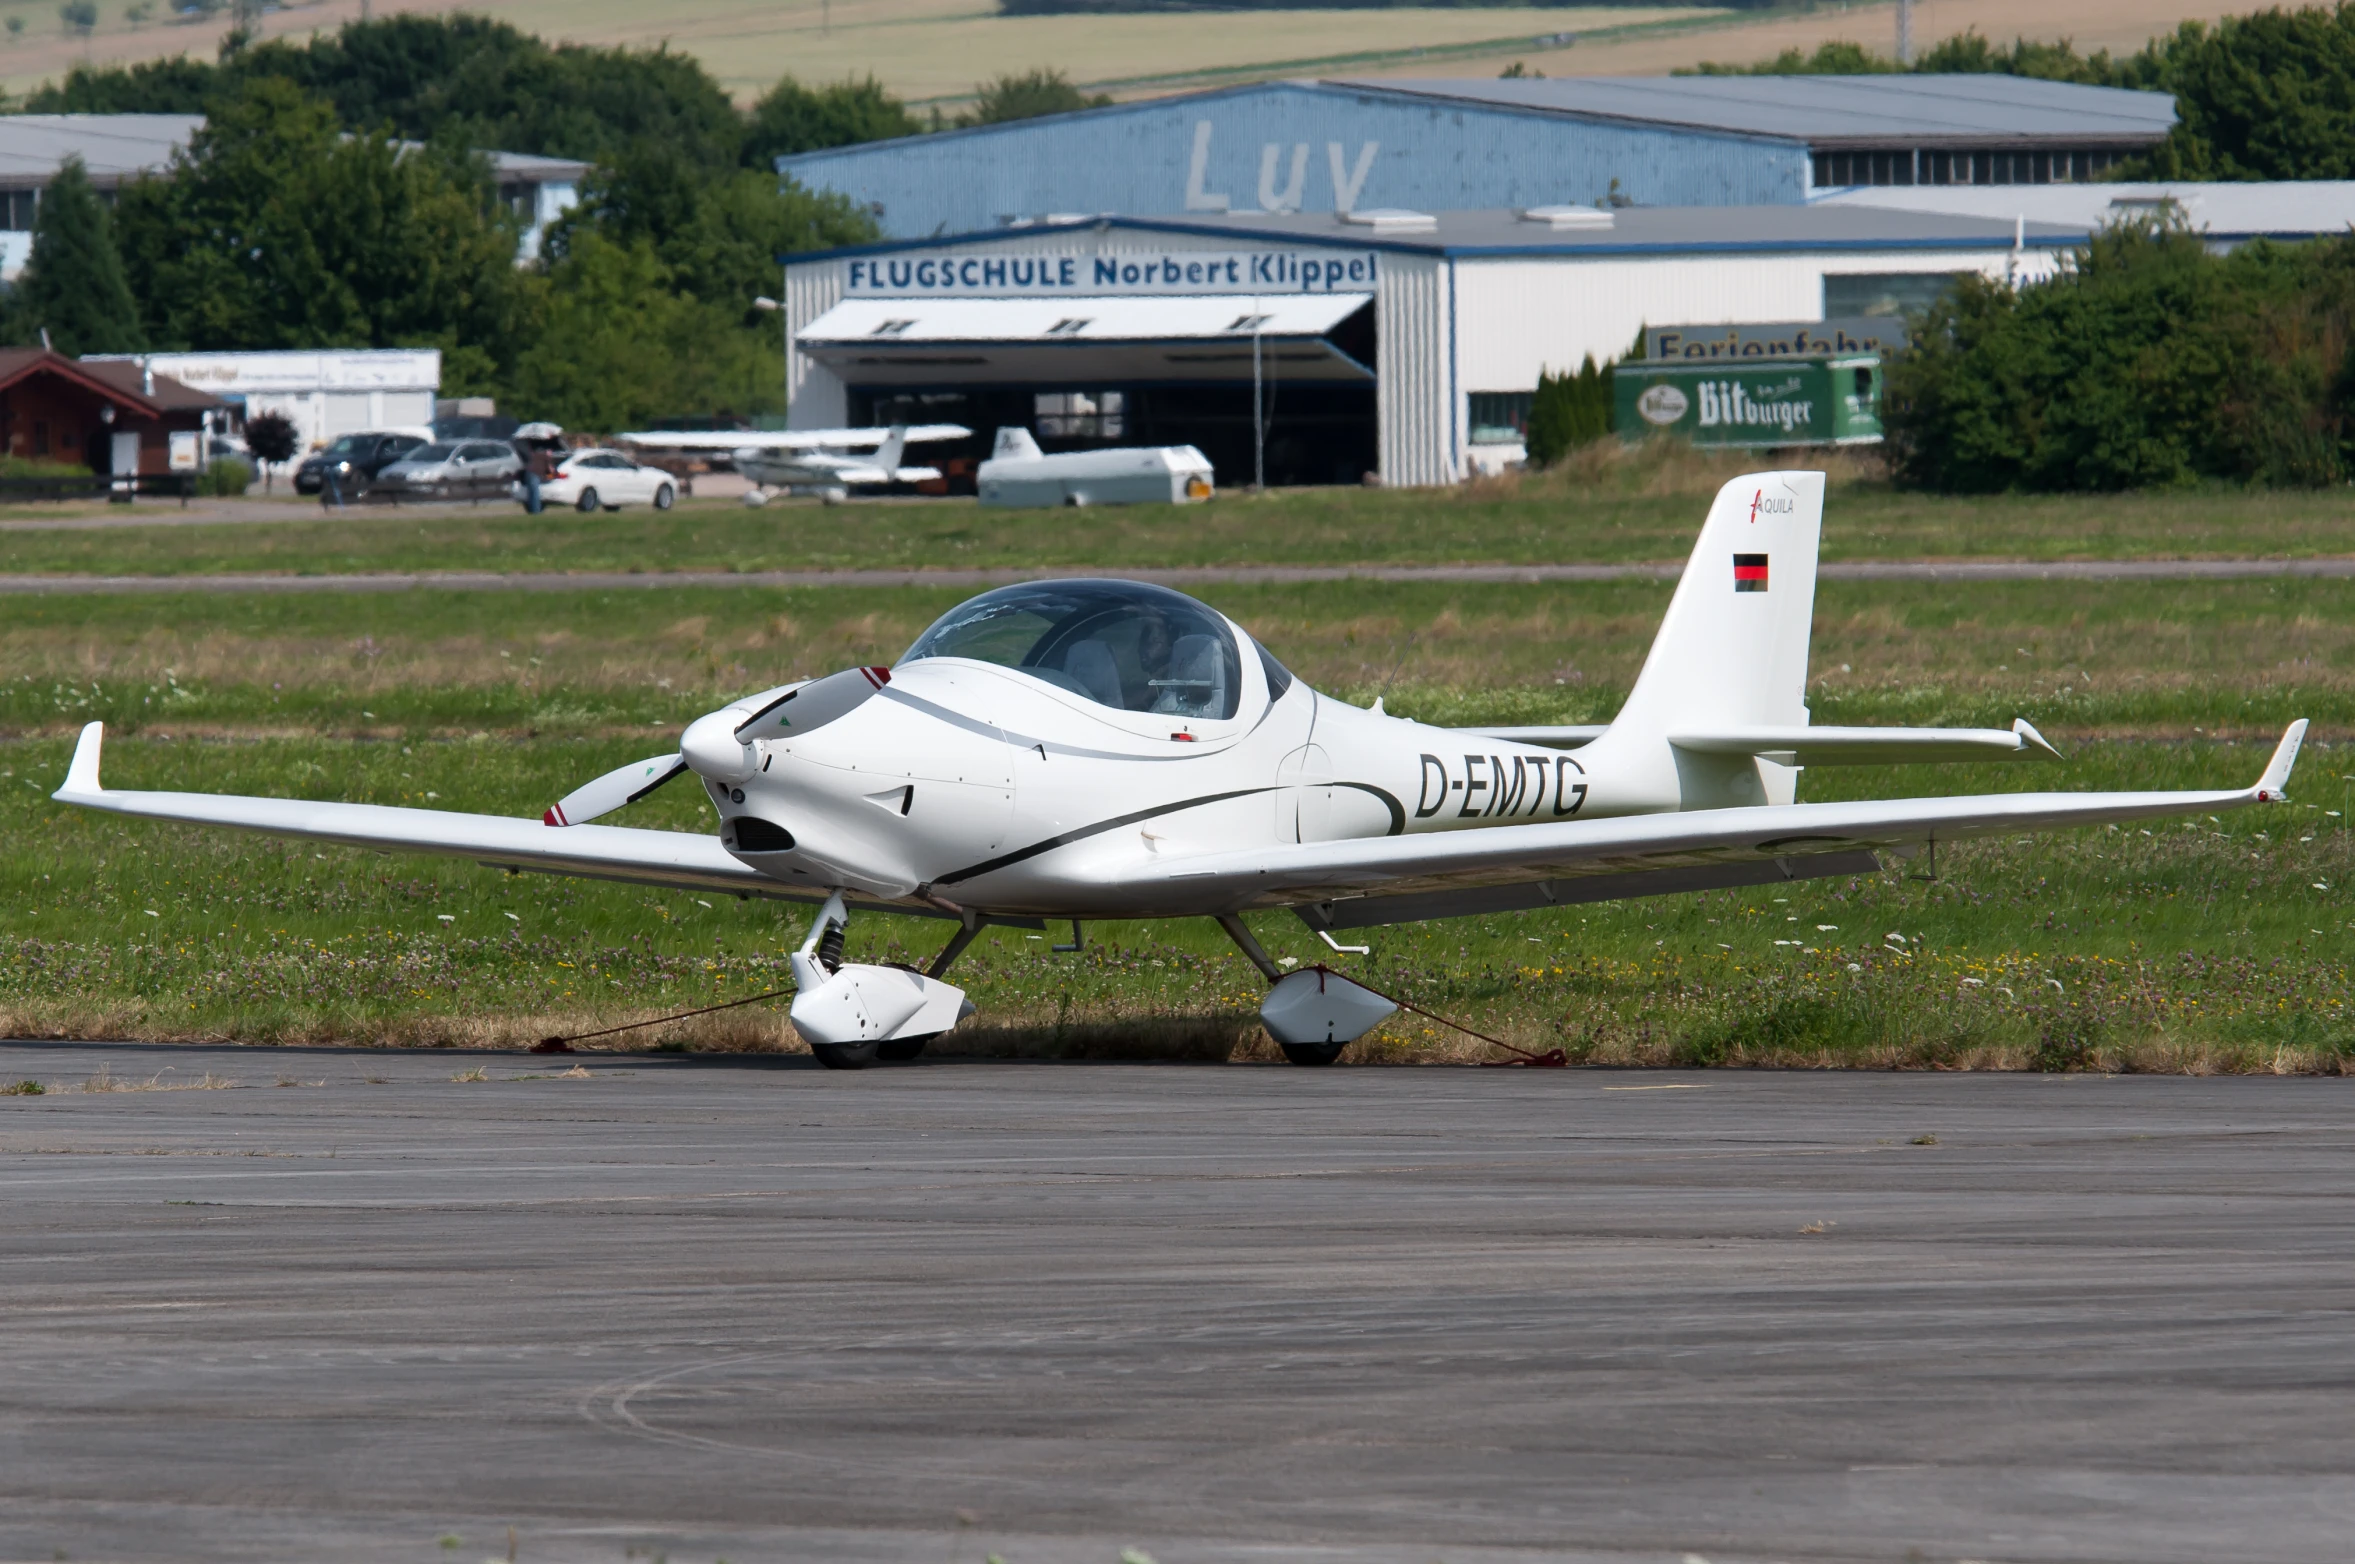 a small private plane on a runway near an airport